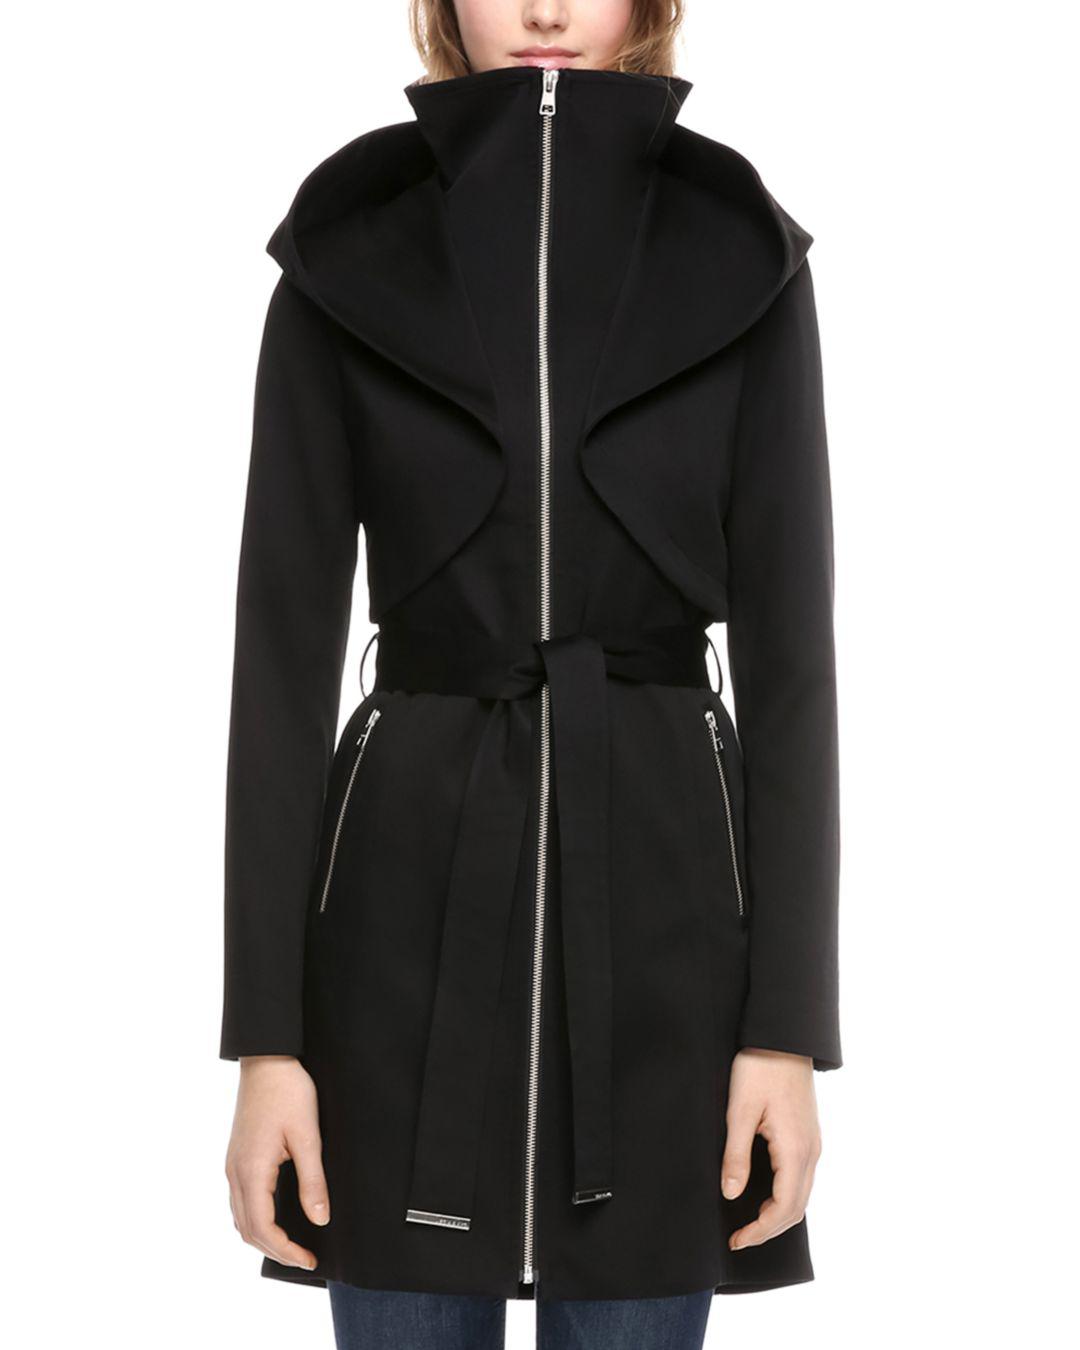 SOIA & KYO Soia And Kyo Arabella Sculpted Raincoat in Black - Lyst